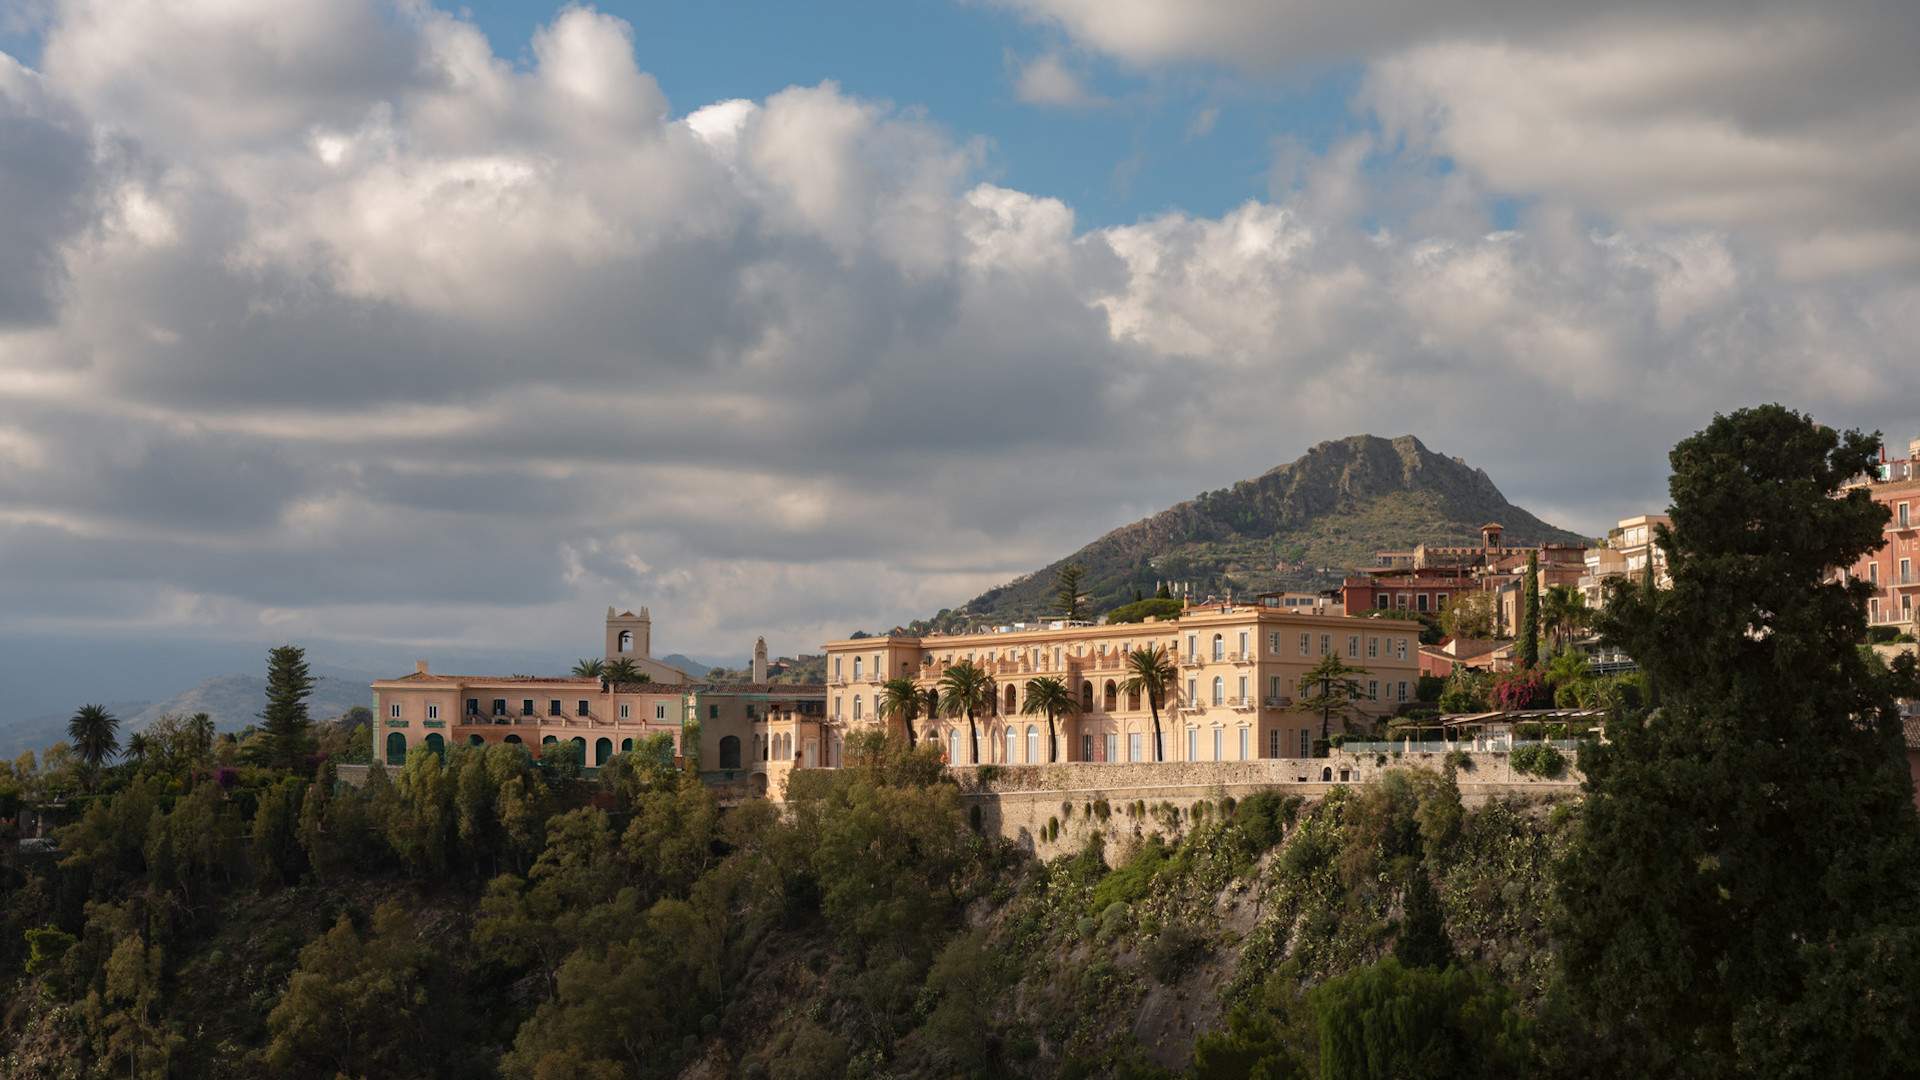 Stay of the Week: San Domenico Palace, Where 'The White Lotus' Season Two Was Filmed